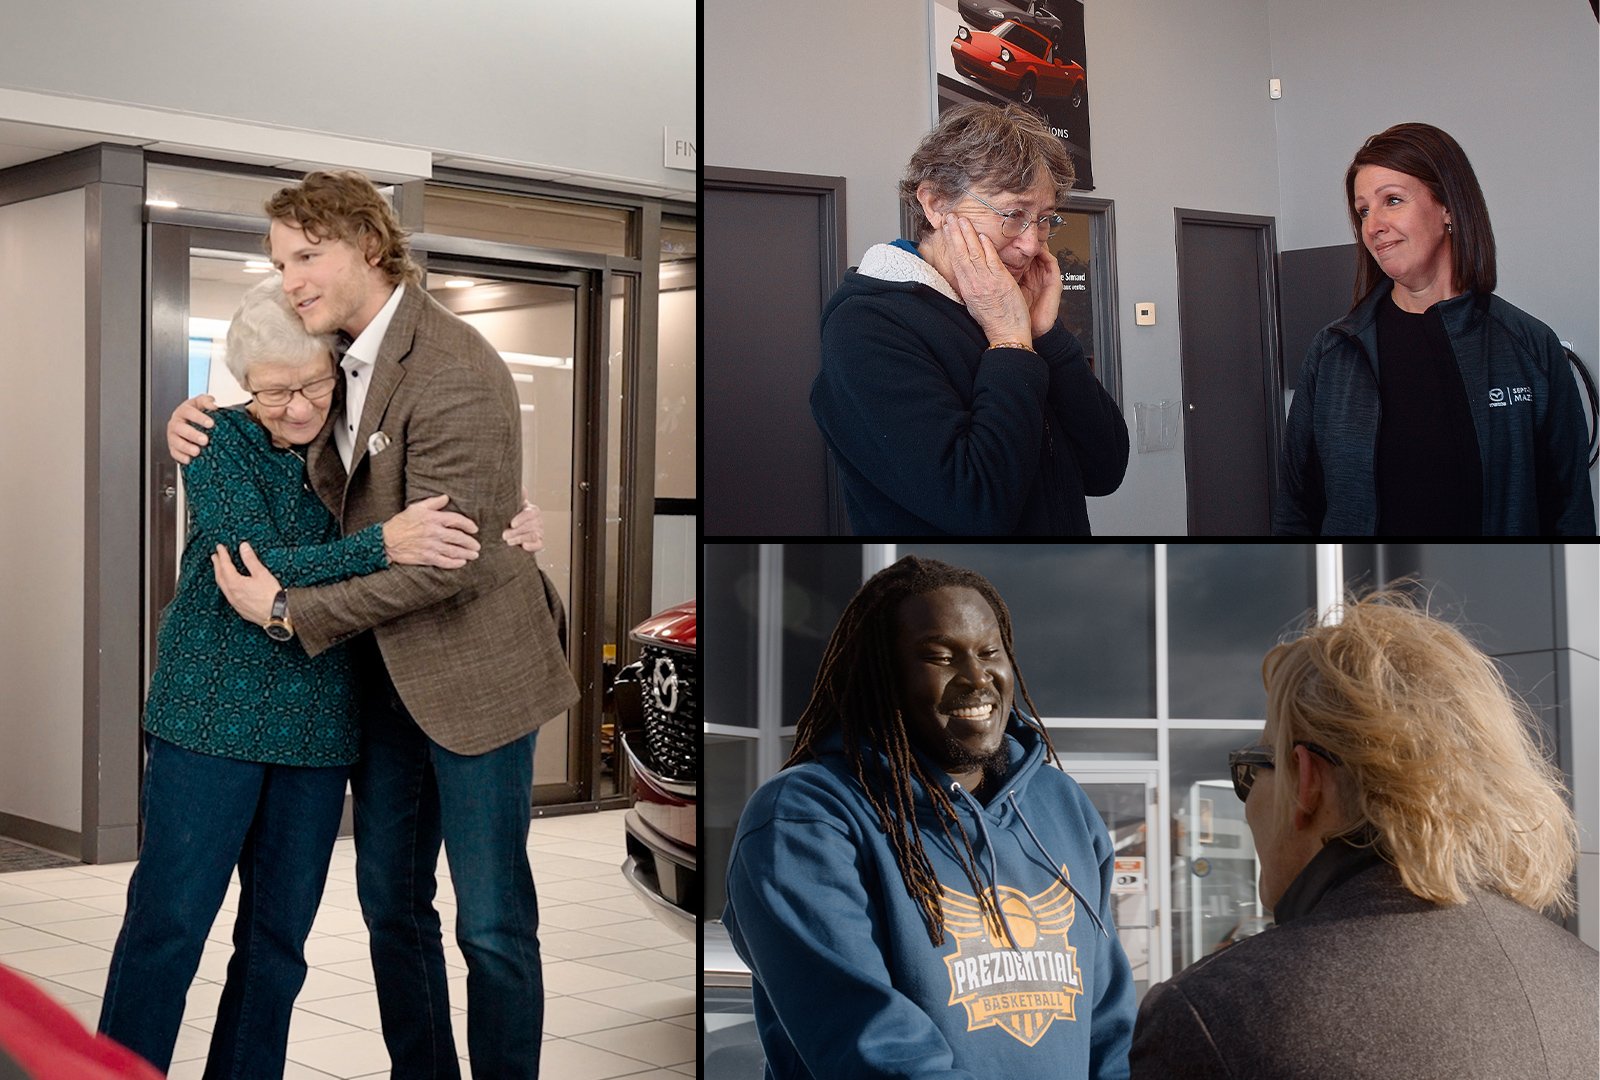 A collage of award recipients. A woman hugs a Mazda dealer on the left, another weeps tears of joy with a dealer in the top right, and a man smiling ear to ear excitedly shakes hands with a Mazda dealer on the bottom right.  